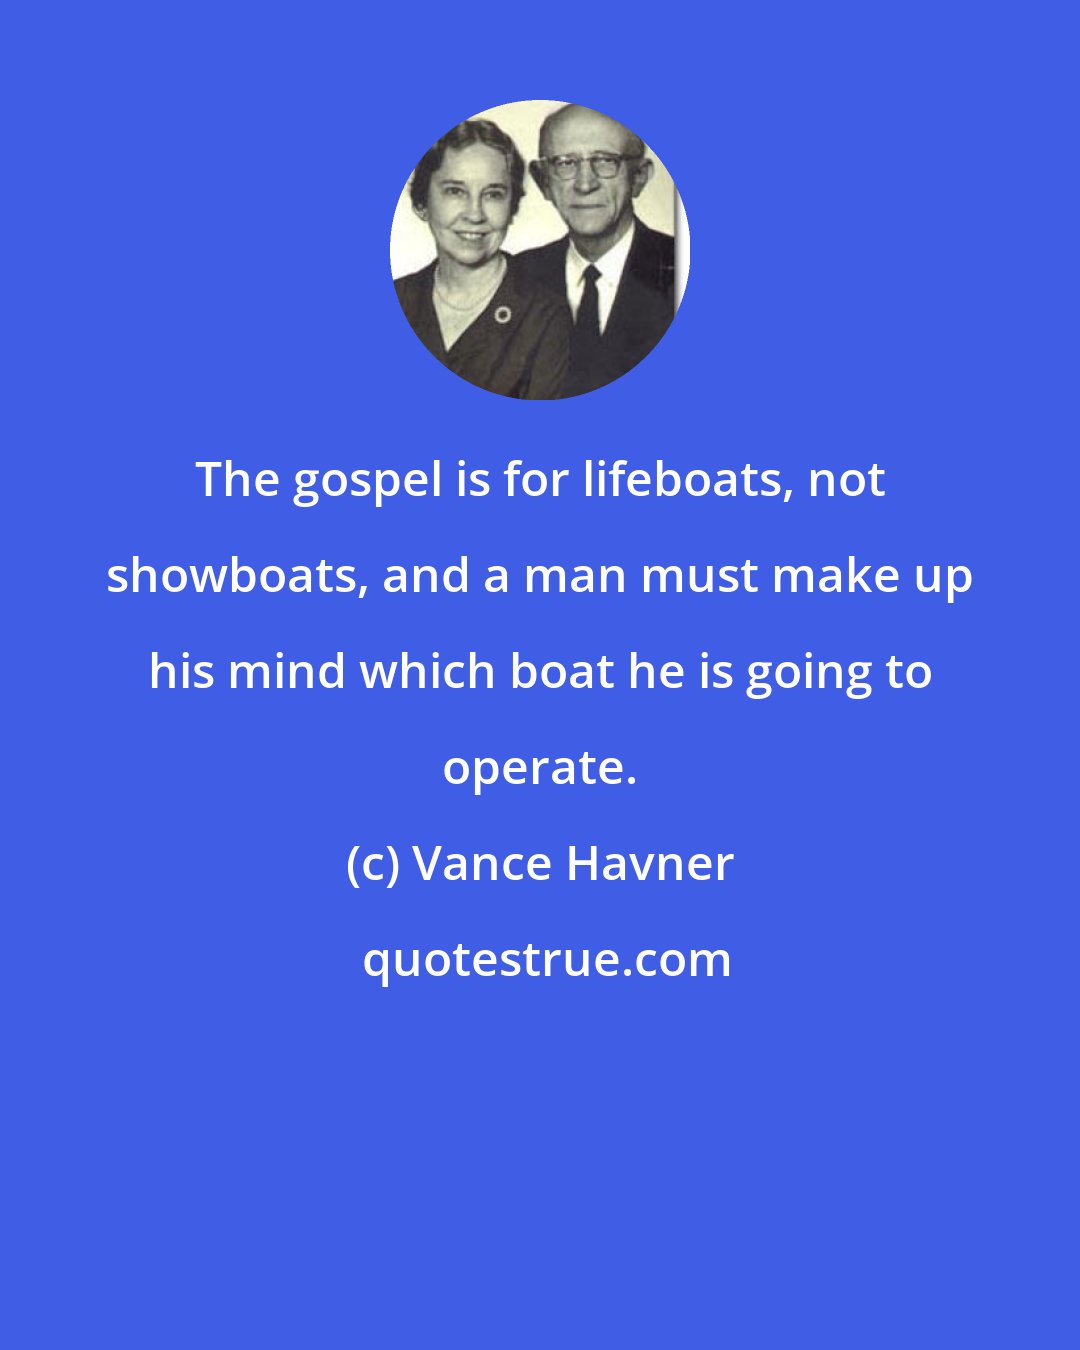 Vance Havner: The gospel is for lifeboats, not showboats, and a man must make up his mind which boat he is going to operate.